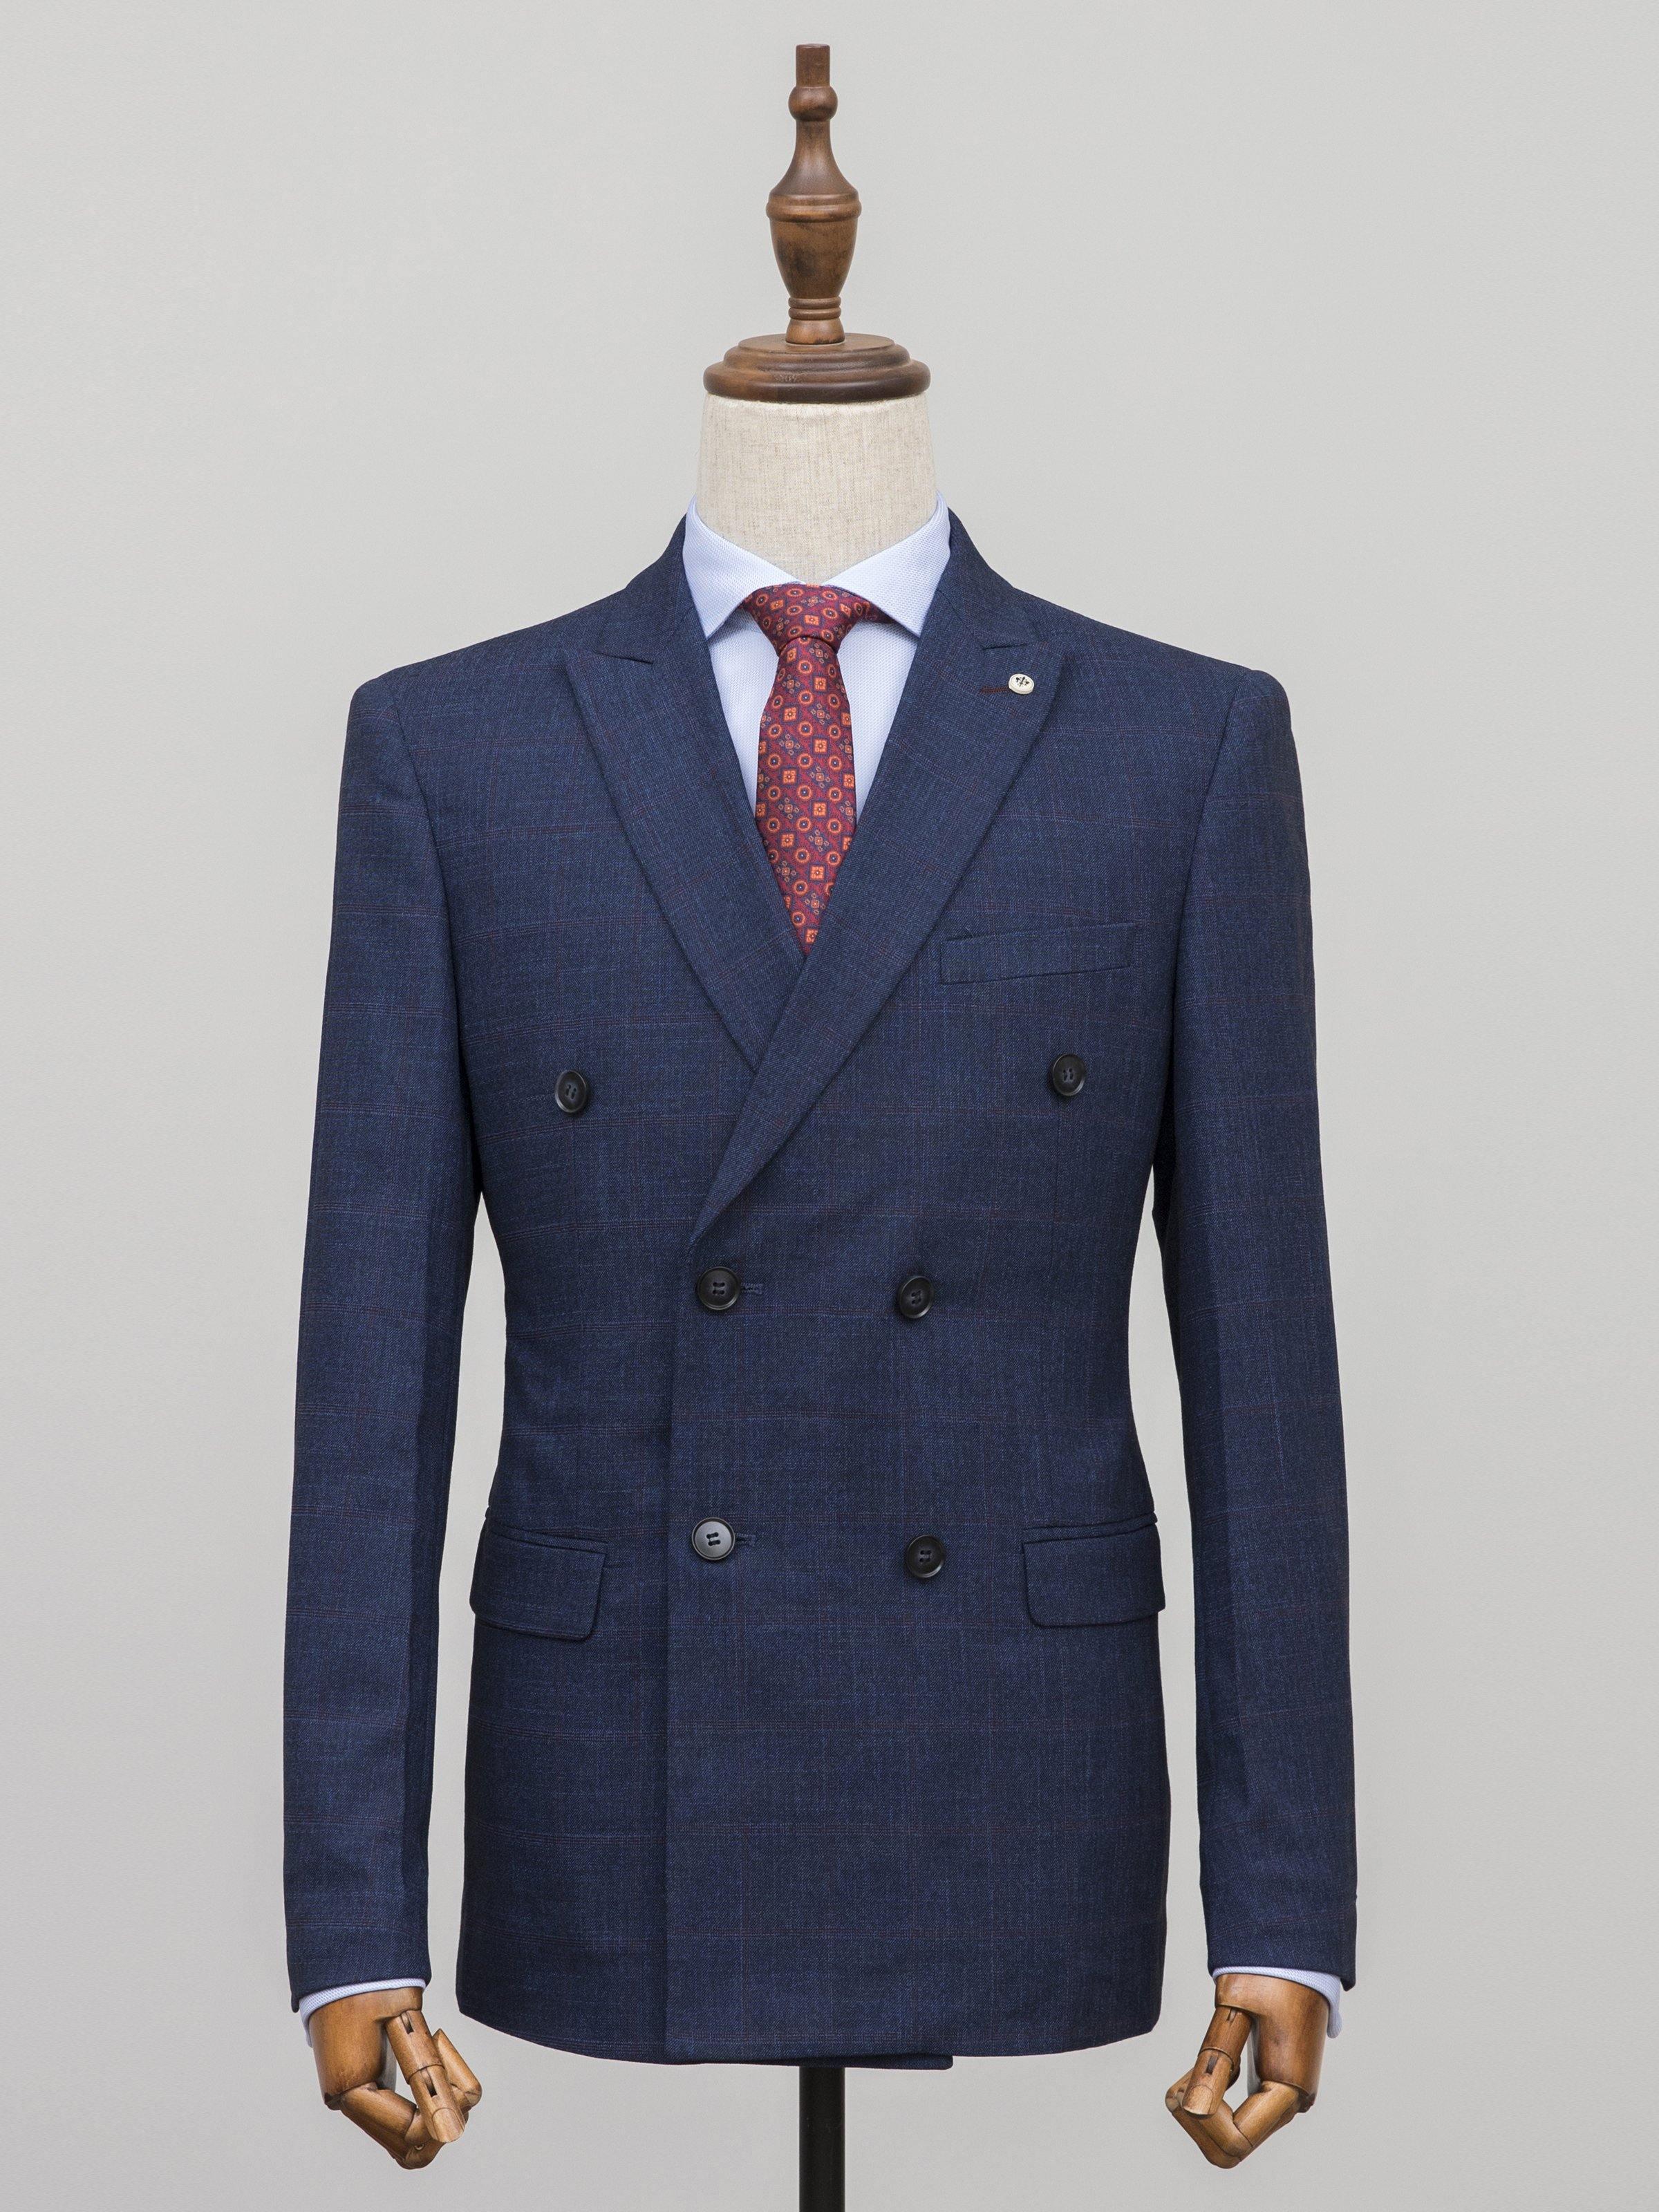 2 PIECE SUIT DOUBLE BREASTED NAVY BLUE at Charcoal Clothing